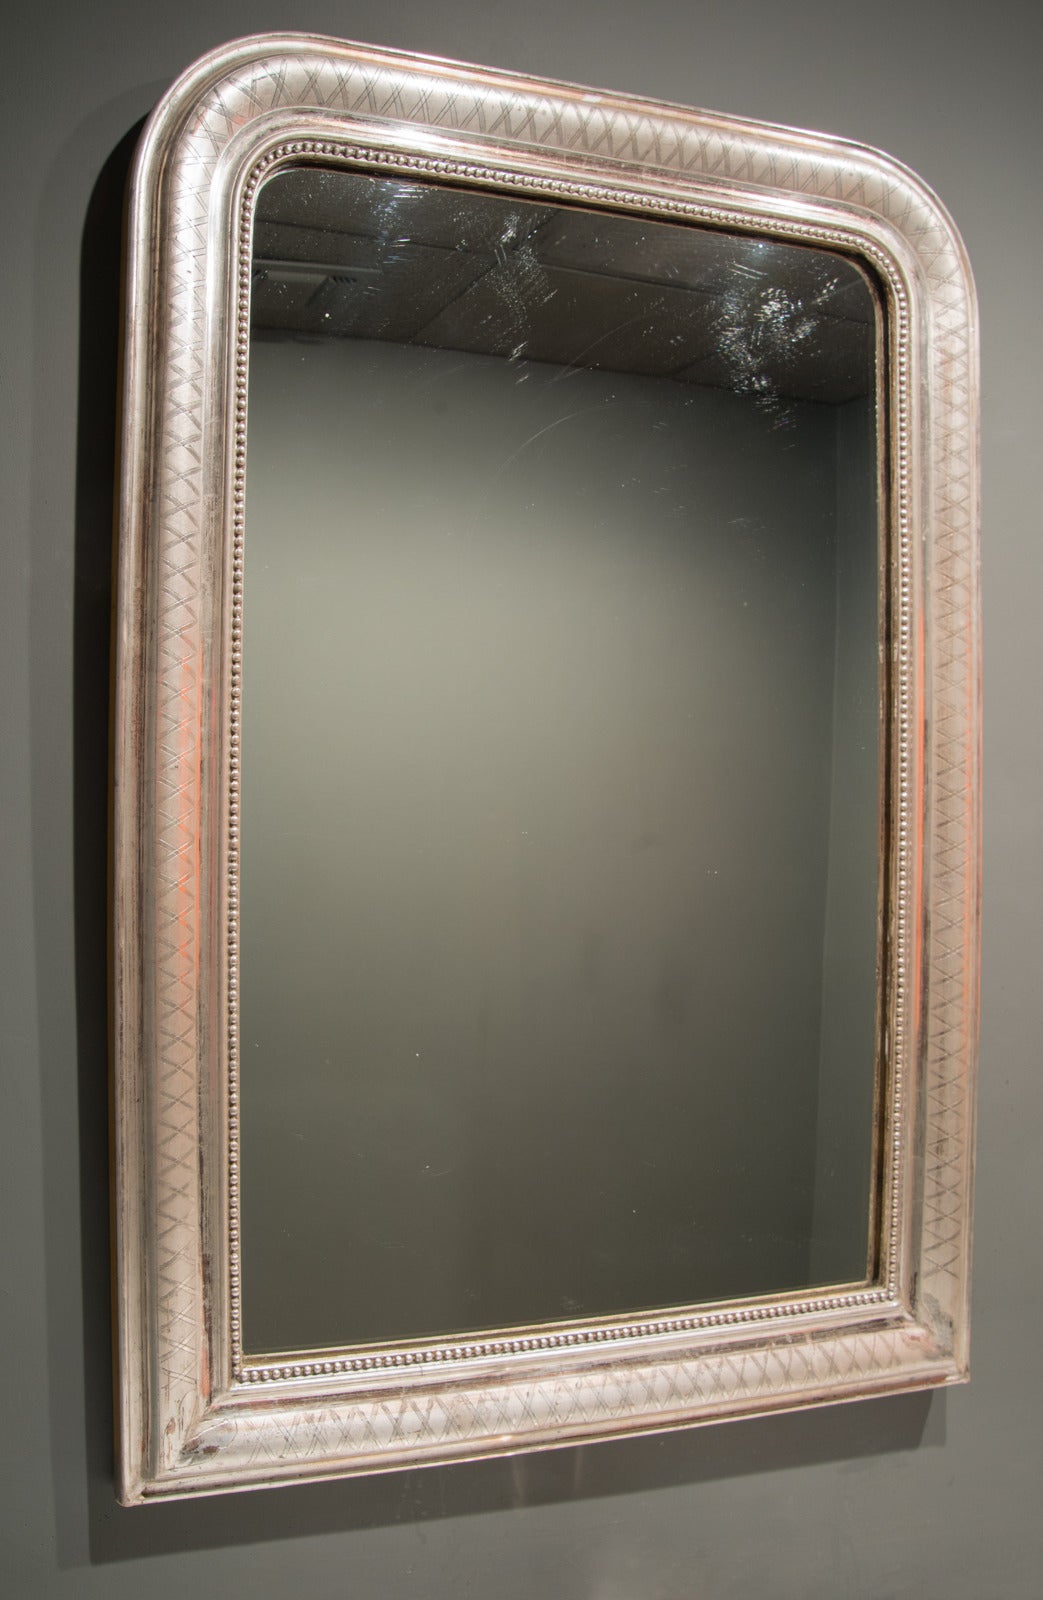 This Louis Philippe mirror is from France in the 19th century. The finish is silver gilt with a bead detail along the inner edge as well as a cross-hatch pattern along the front of the frame. The overall appearance of this mirror is quite lovely,